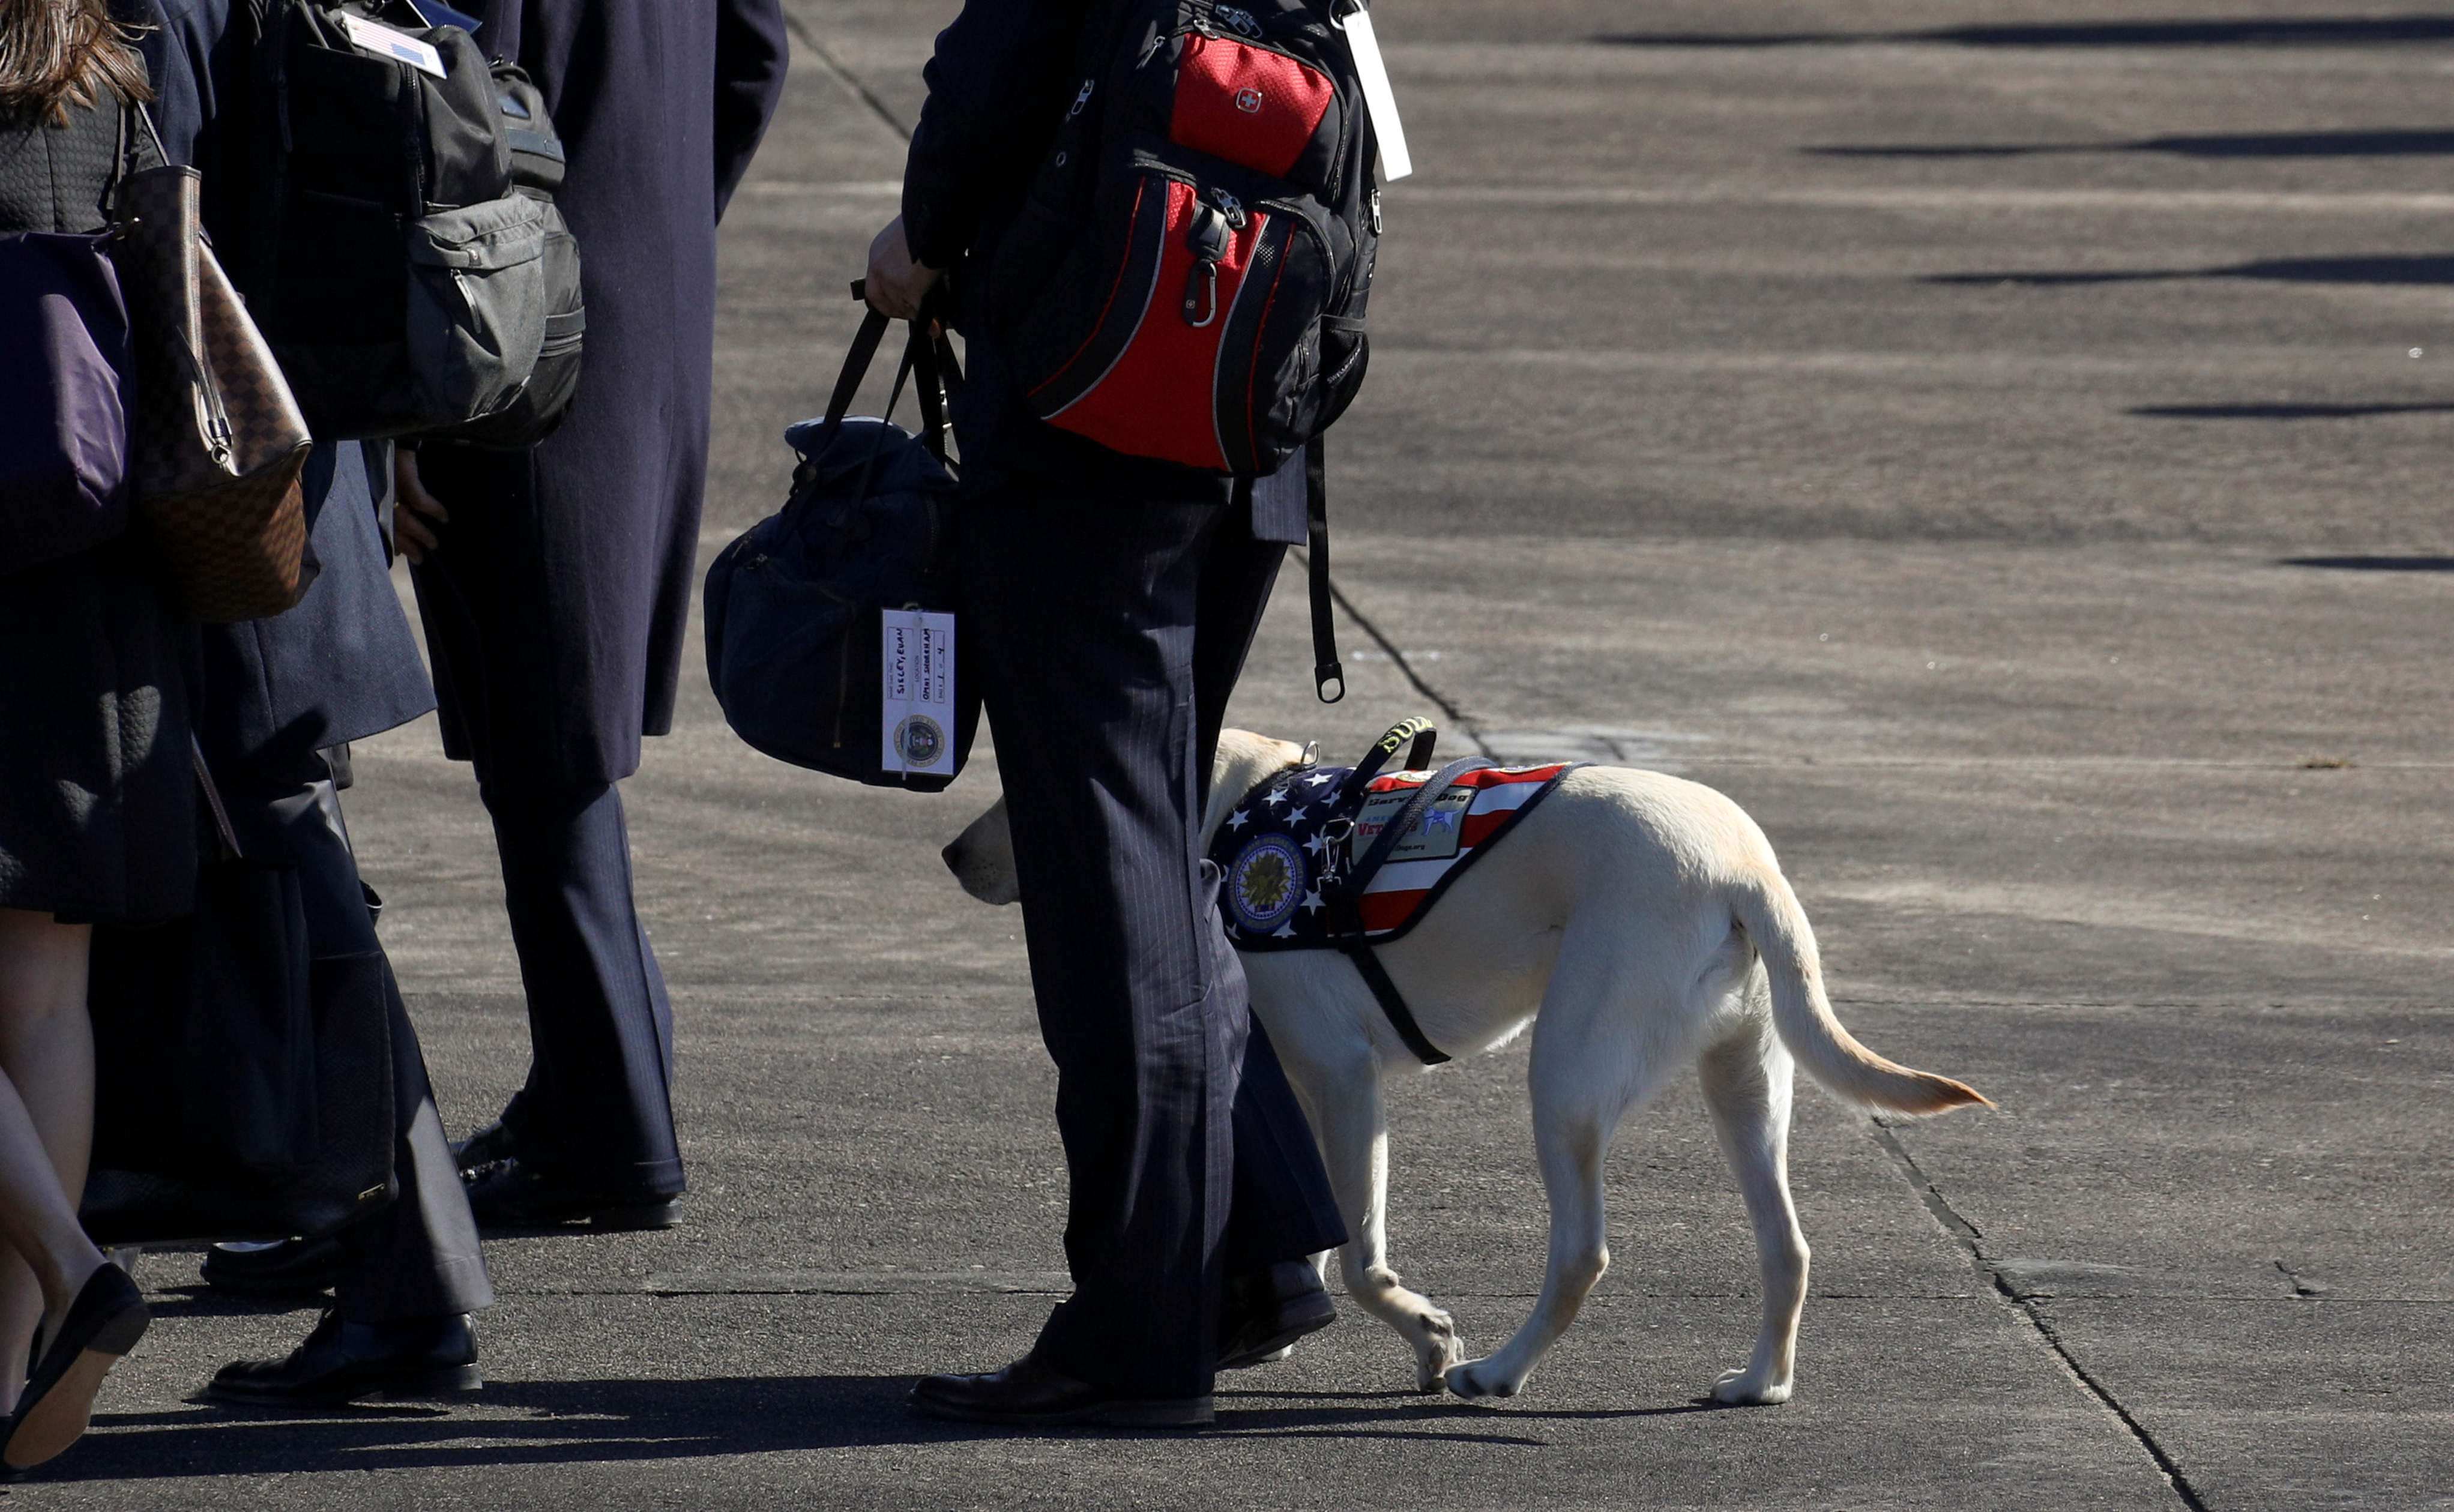 Former President George H.W. Bush's service dog Sully is seen at a departure ceremony during which the former president's casket was put on the Special Air Mission 41 plane at Ellington Field Joint Reserve Base in Houston, Texas, U.S., December 3, 2018. (REUTERS/Loren Elliott)